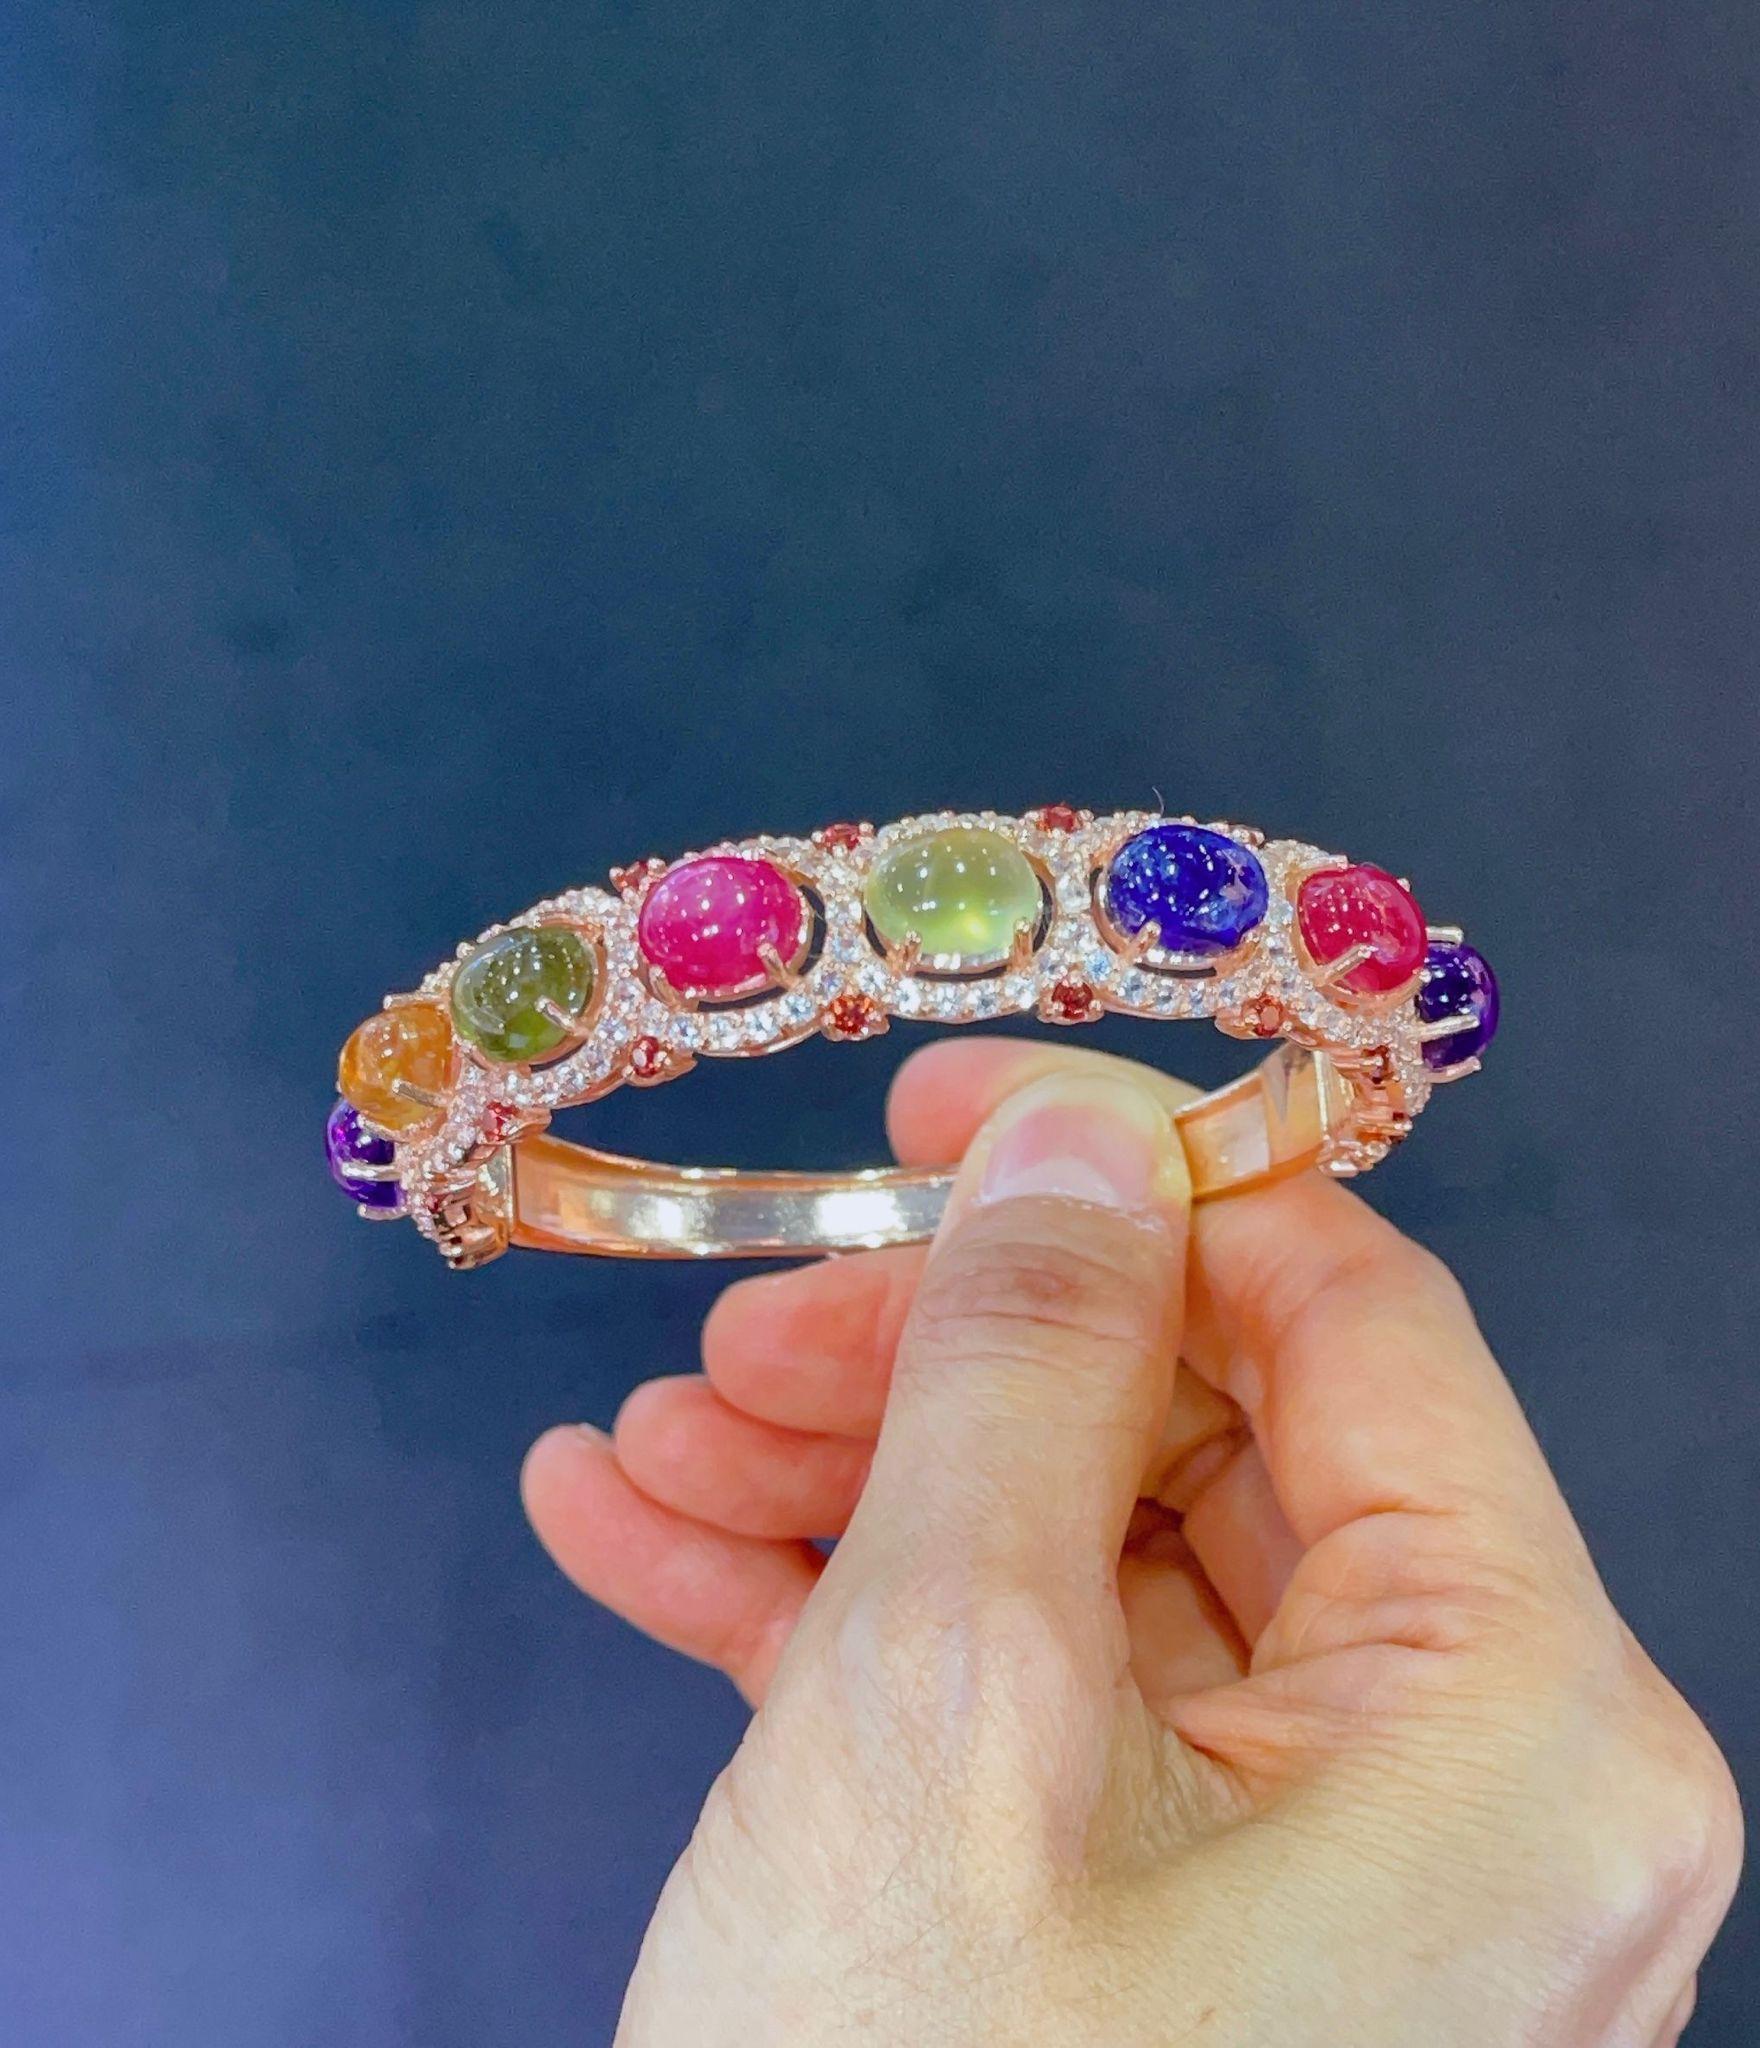 Bochic “Capri” Red Ruby & Multi Color Sapphires Bangle Set In 18K Gold & Silver 
Natural Blue Sapphire 
Natural Yellow Sapphire 
Natural Green Sapphire 
All large cabochon shapes 
40.24 Carats 
Natural Red Ruby 
Natural Penite 
All Cabochon shapes